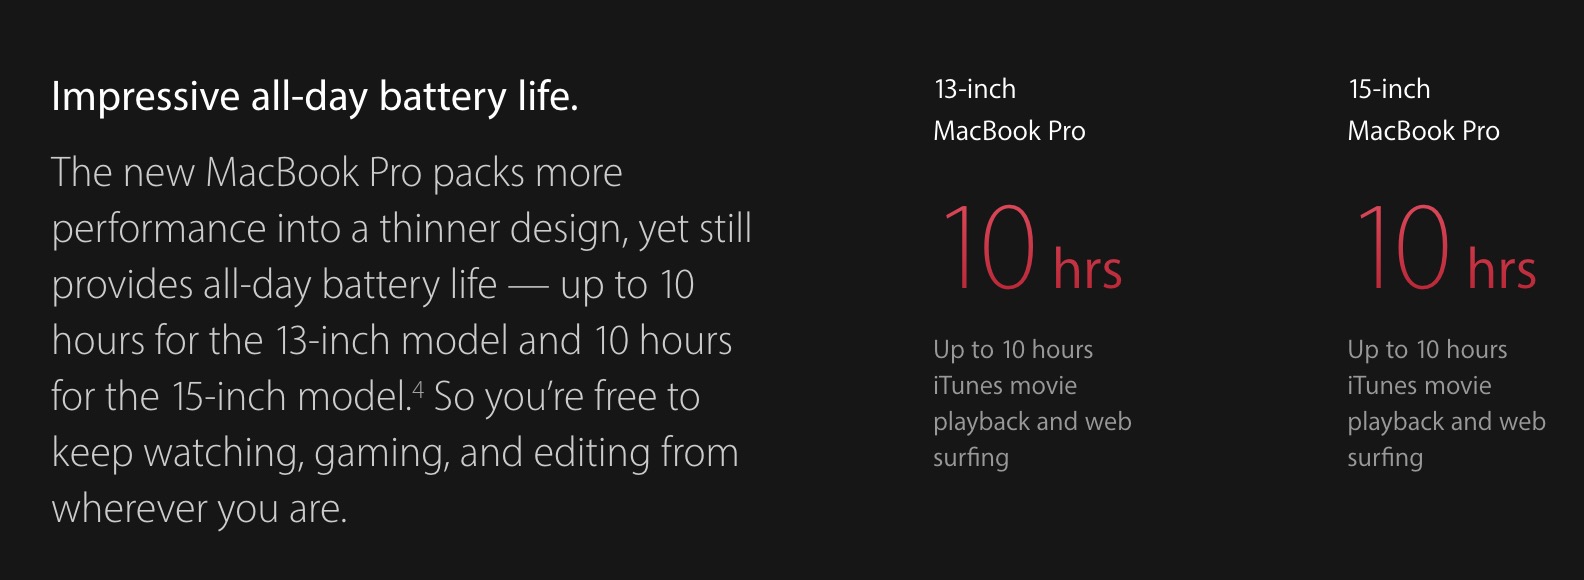 Impressive all day battery life advertising MacBook